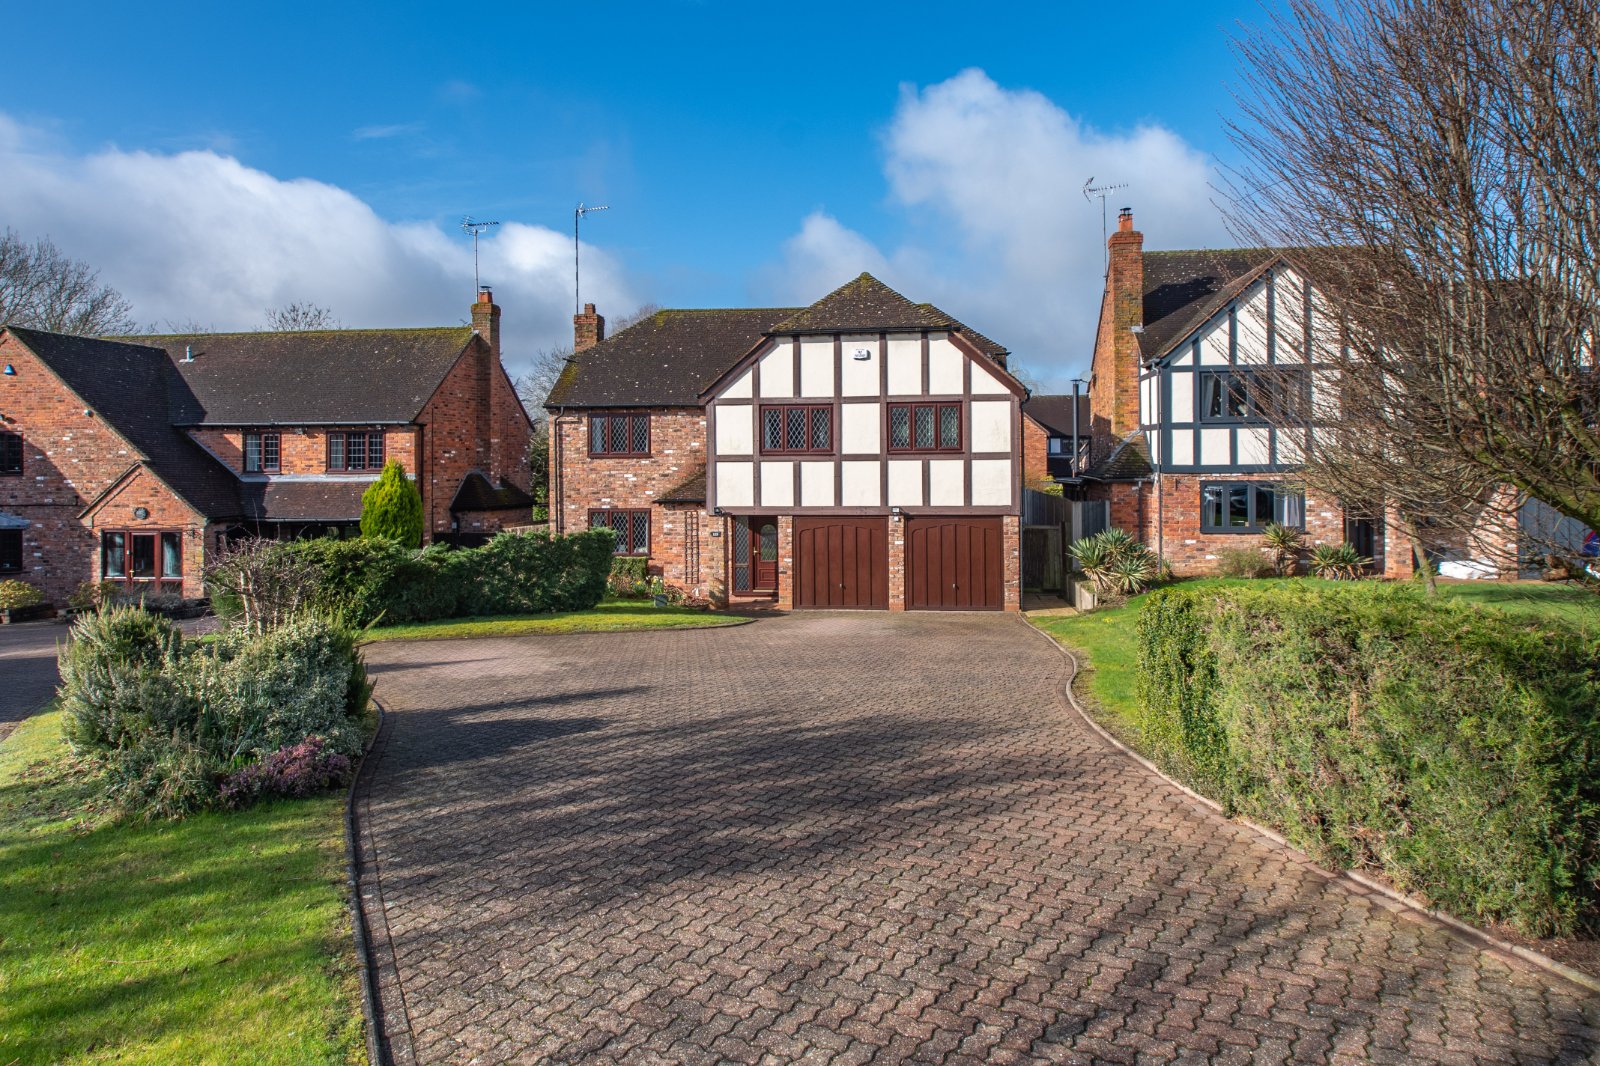 5 bed house for sale in Hither Green Lane, Redditch - Property Image 1